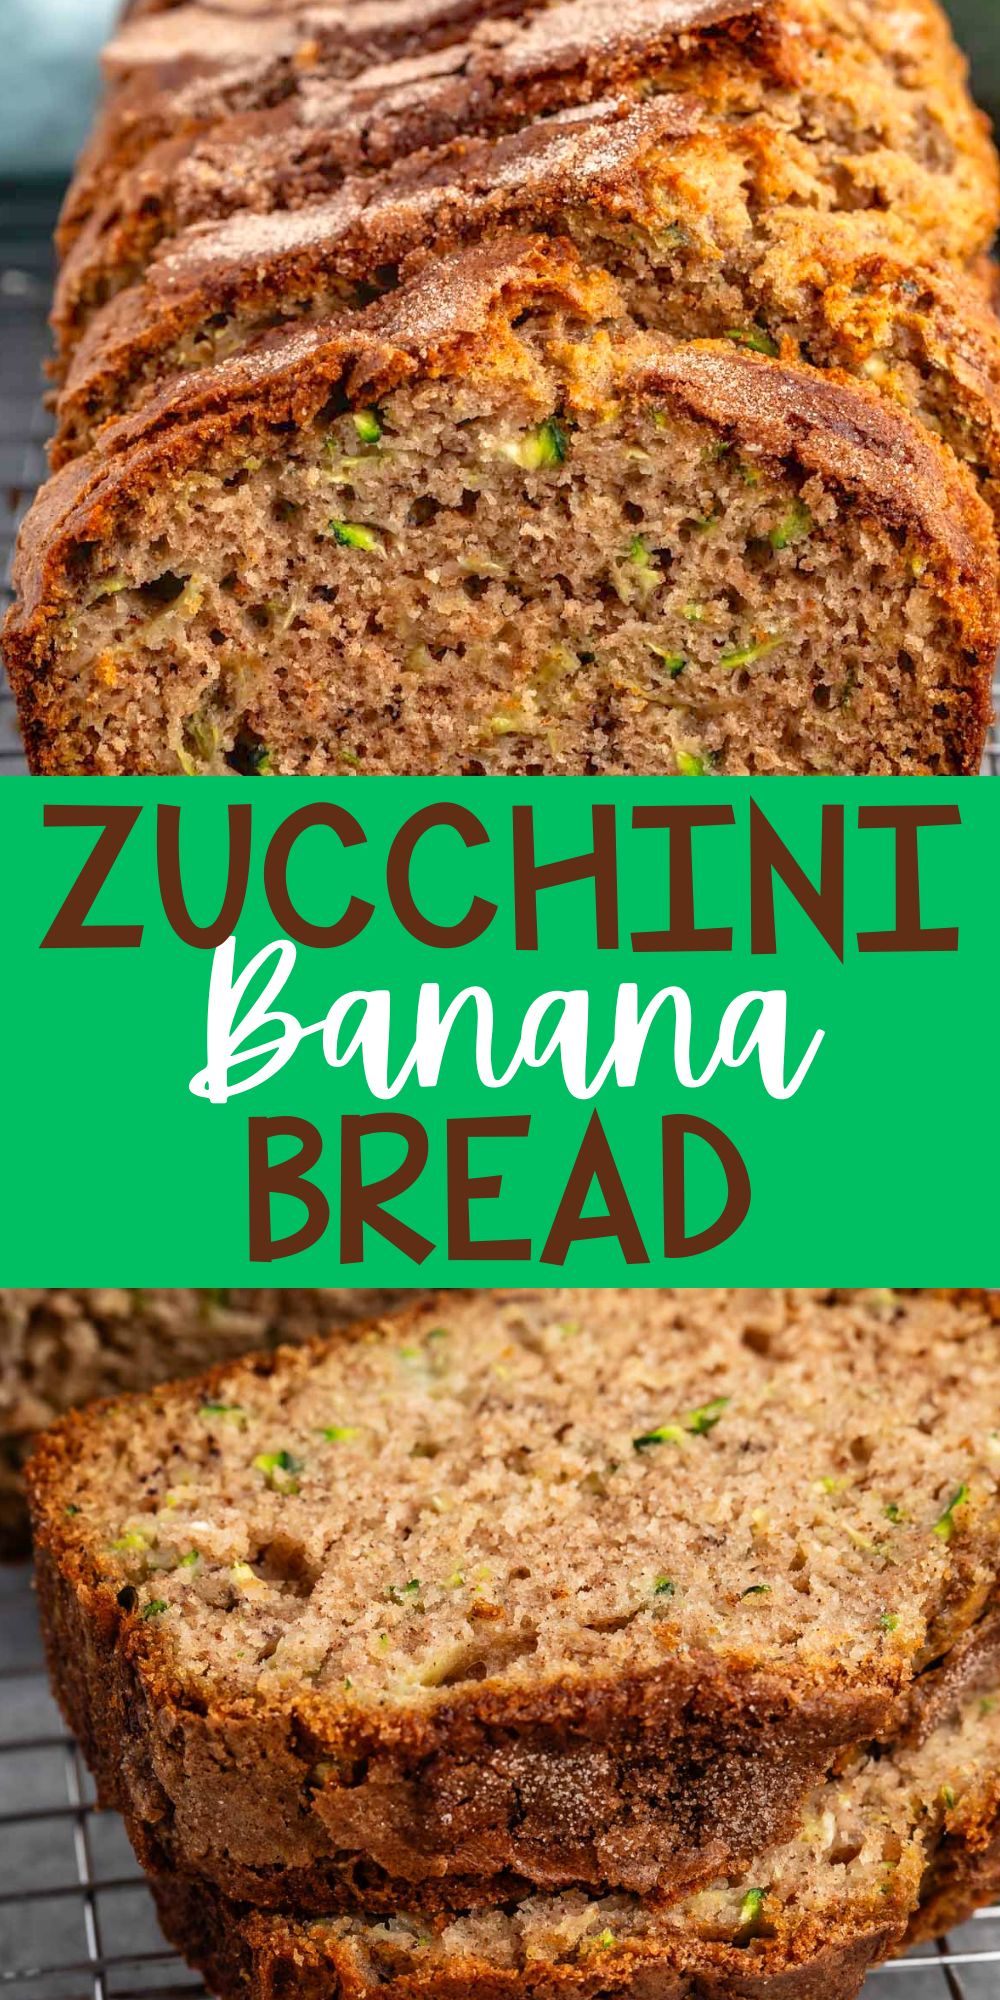 two photos of sliced banana bread with shredded zucchini baked inside with words on the image.